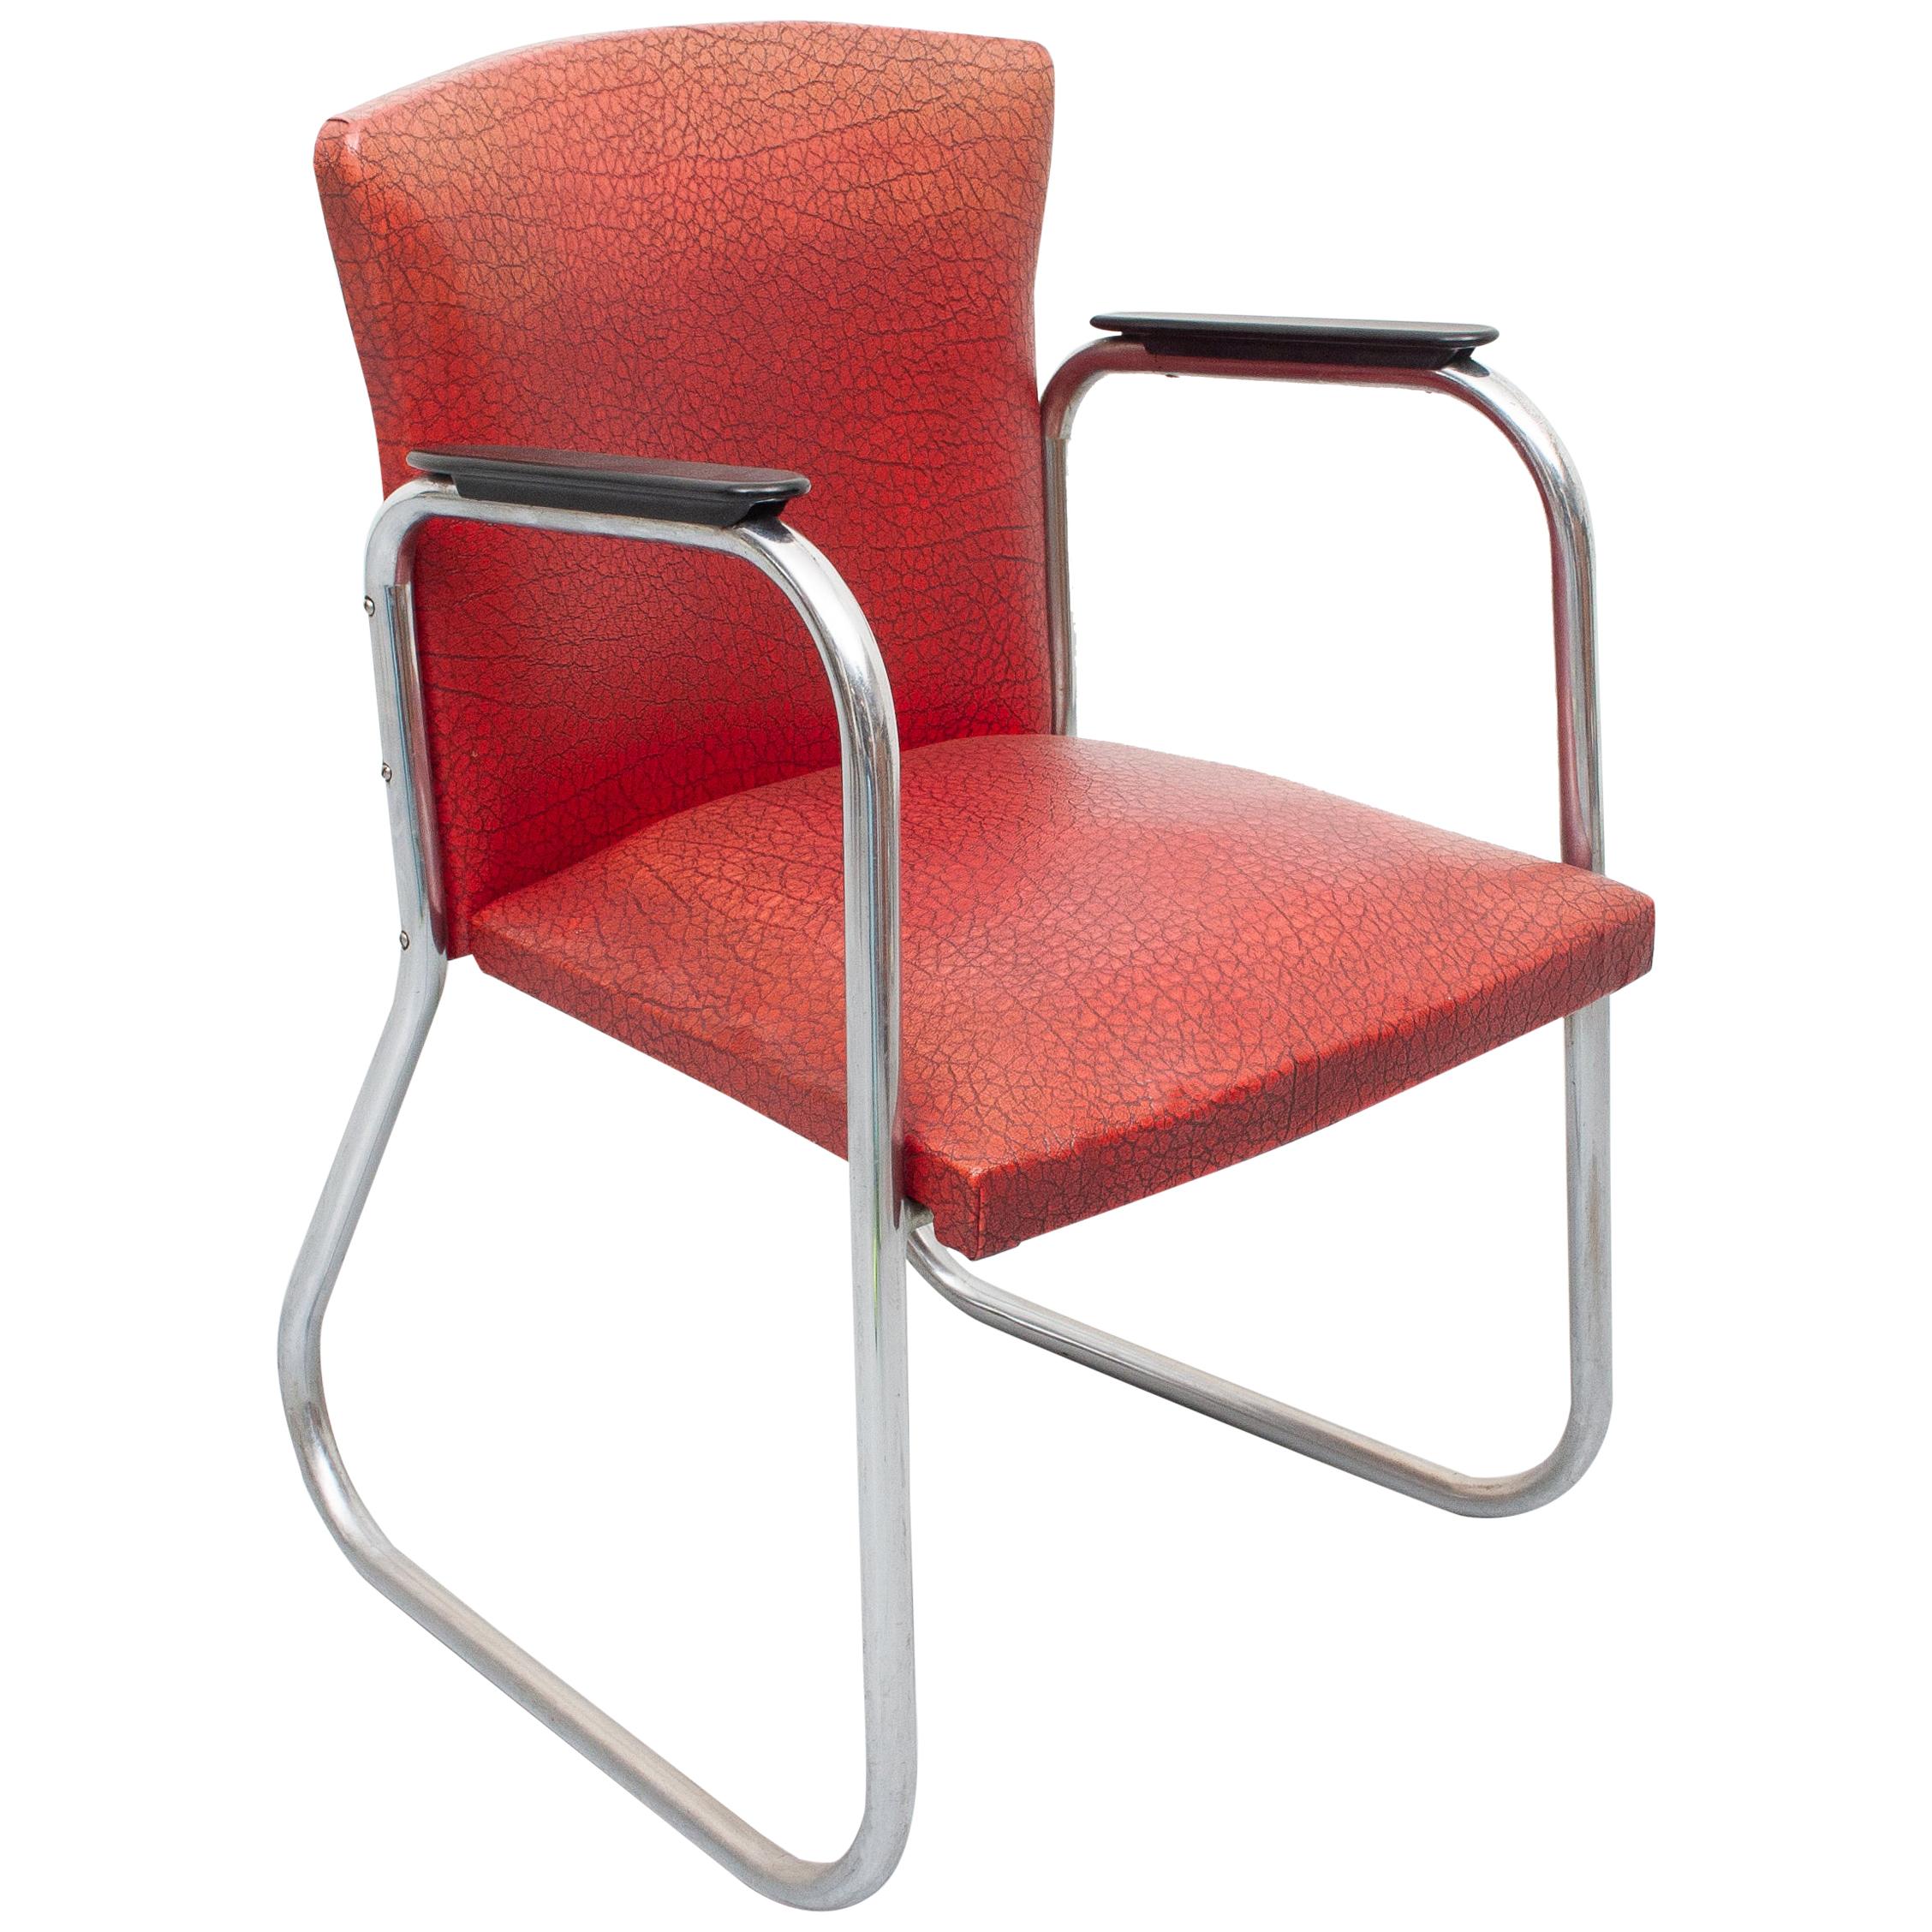 Chrome Tube Desk Chair Attributed Paul Schuitema, 1950s